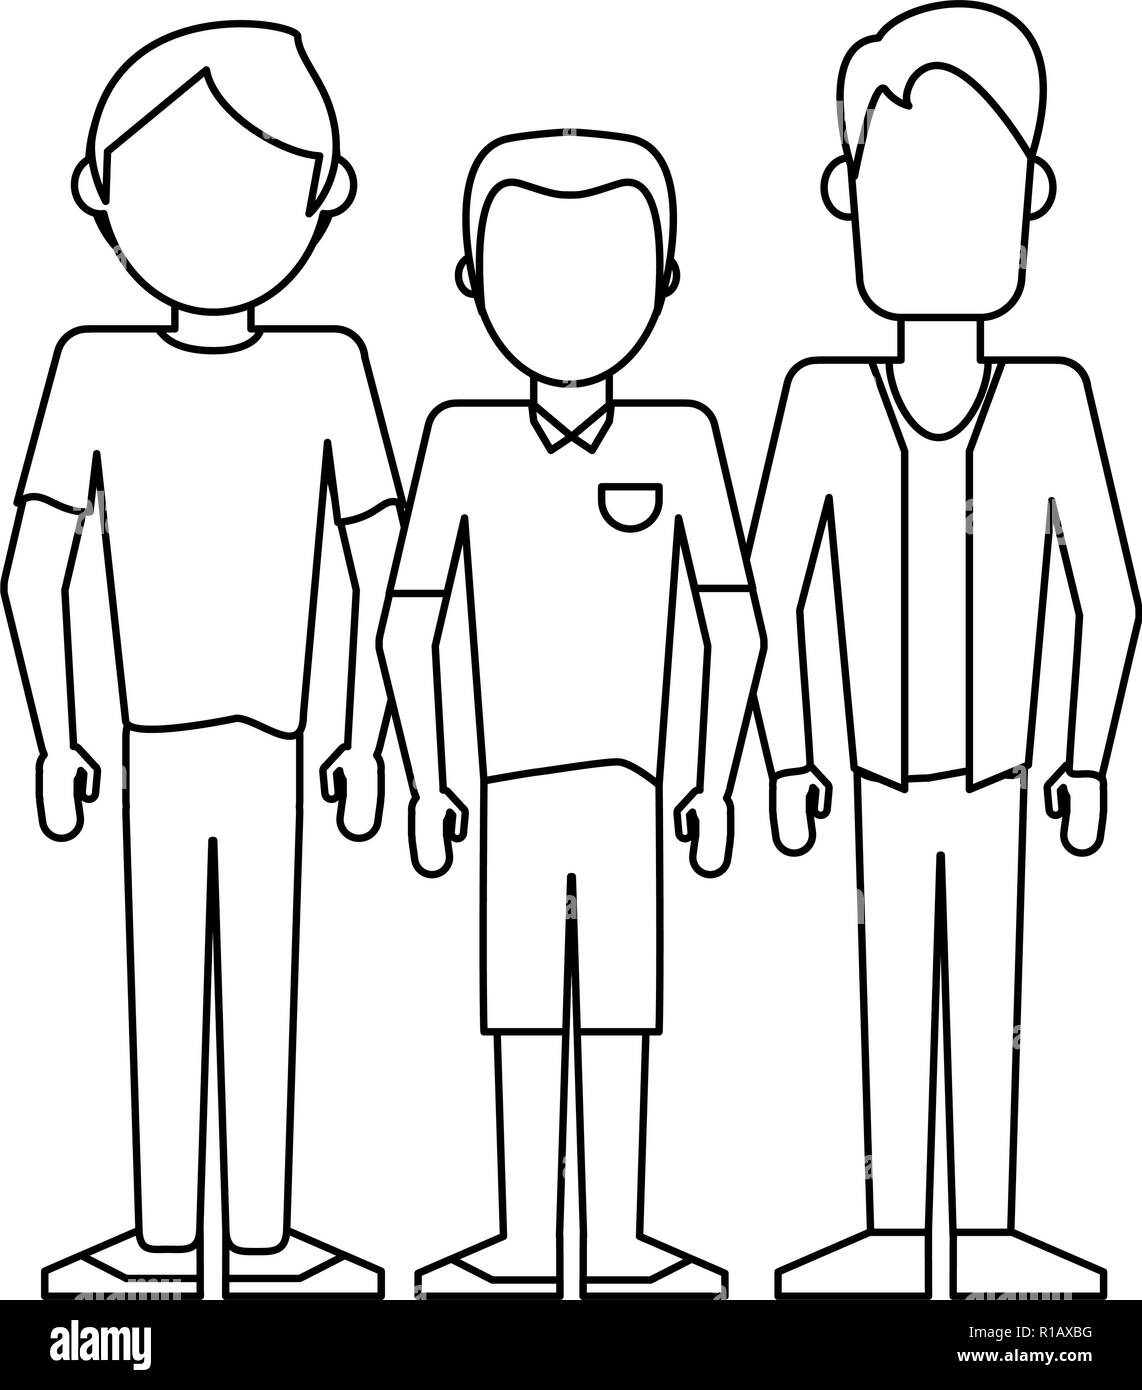 Male friends avatar cartoons in black and white vector illustration graphic design Stock Vector